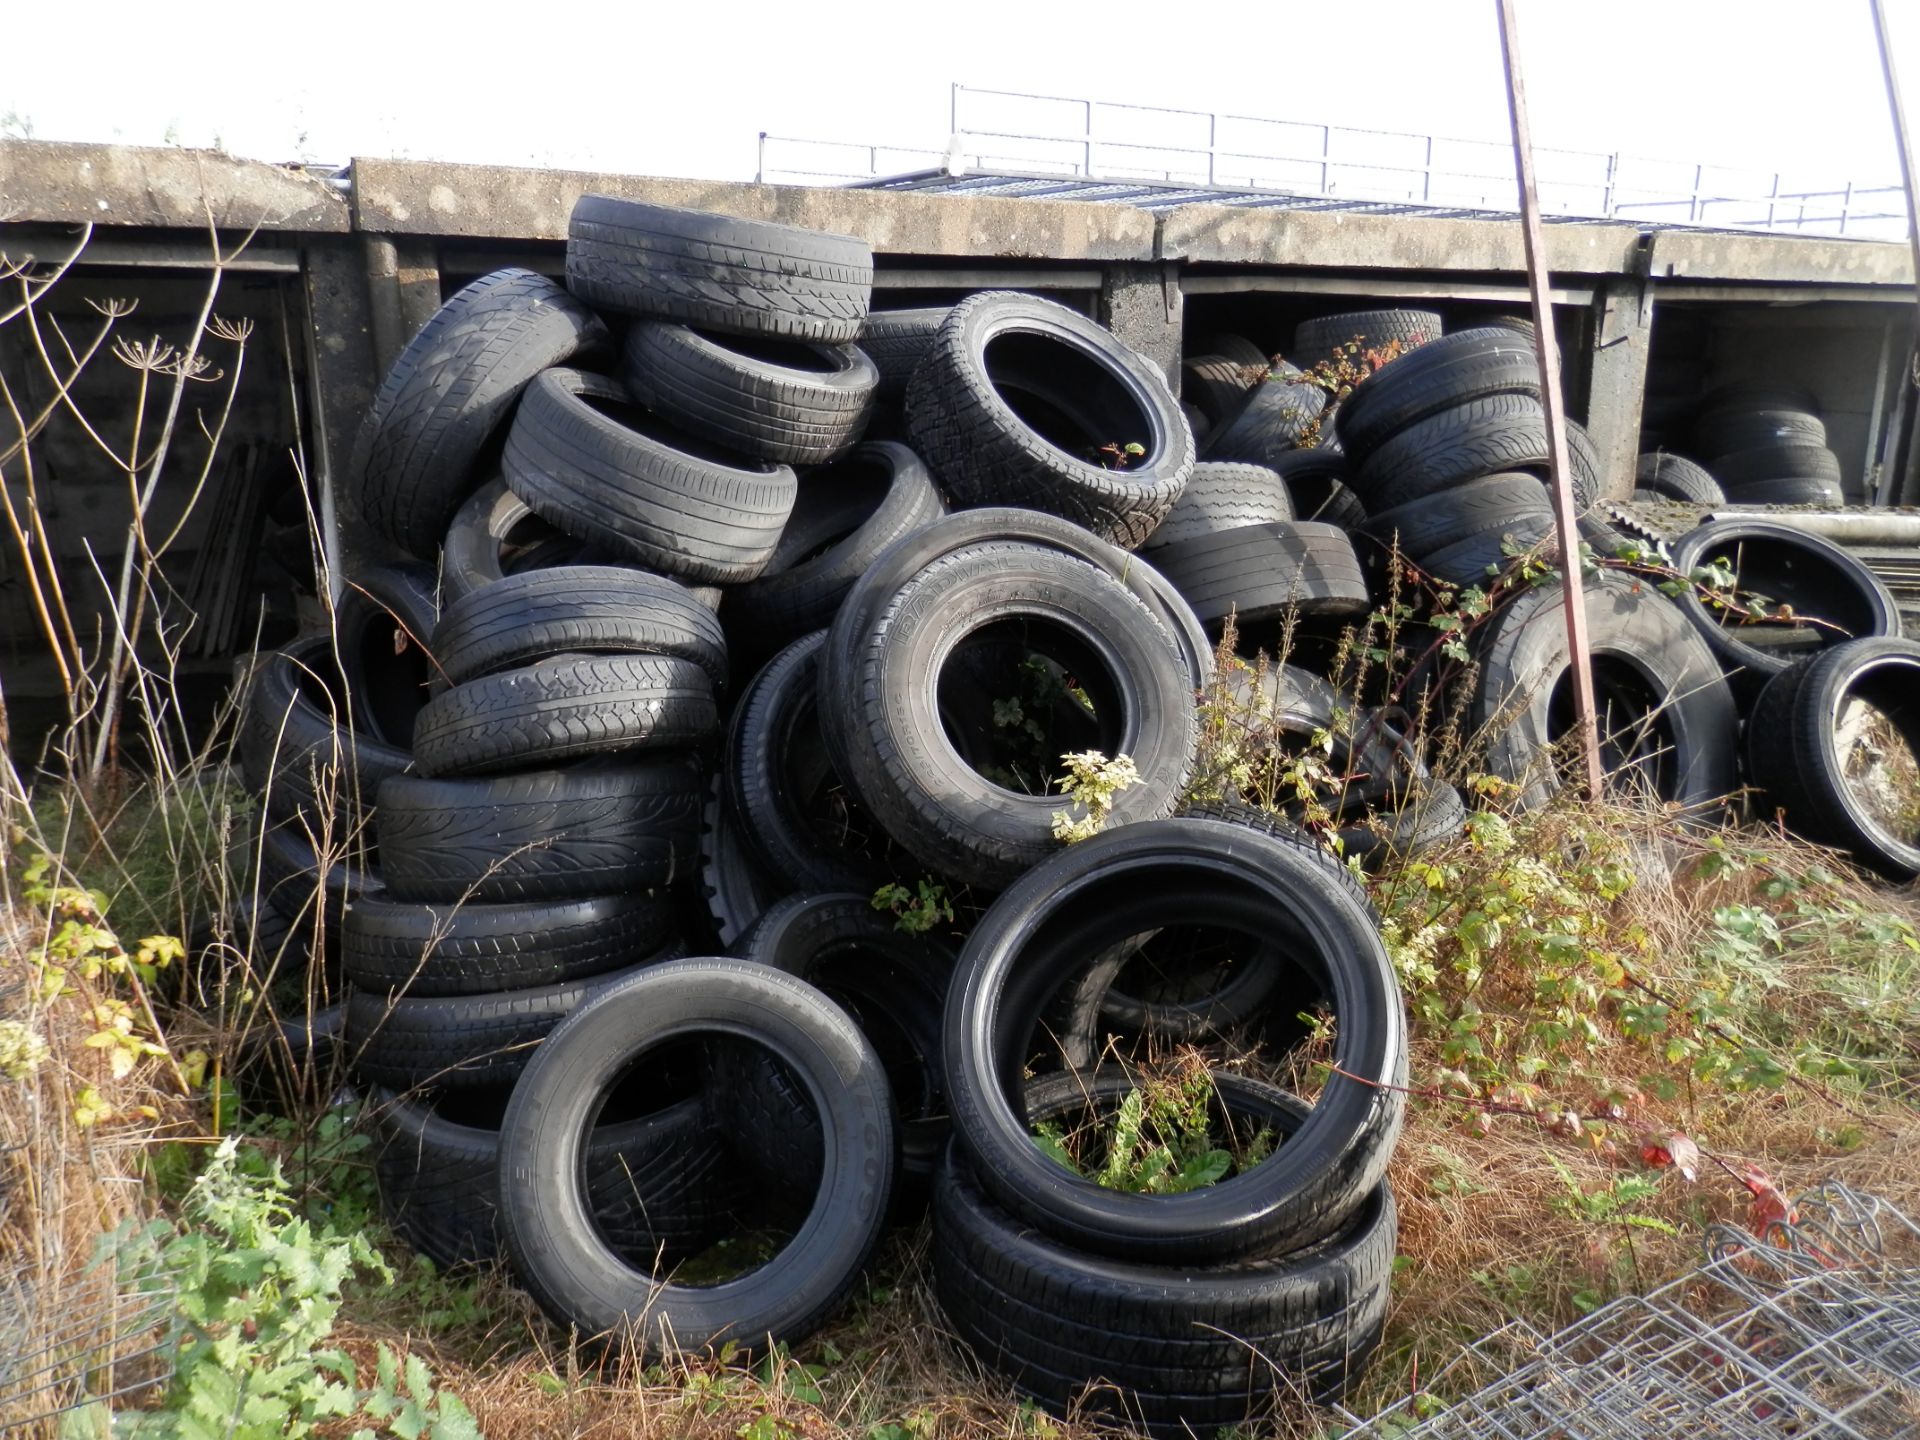 3 GARAGES FULL OF USED, PART WORN TYRES. ASSORTED FROM CAR TO LORRY TYRES. POSSIBLY 800+ - Image 6 of 8